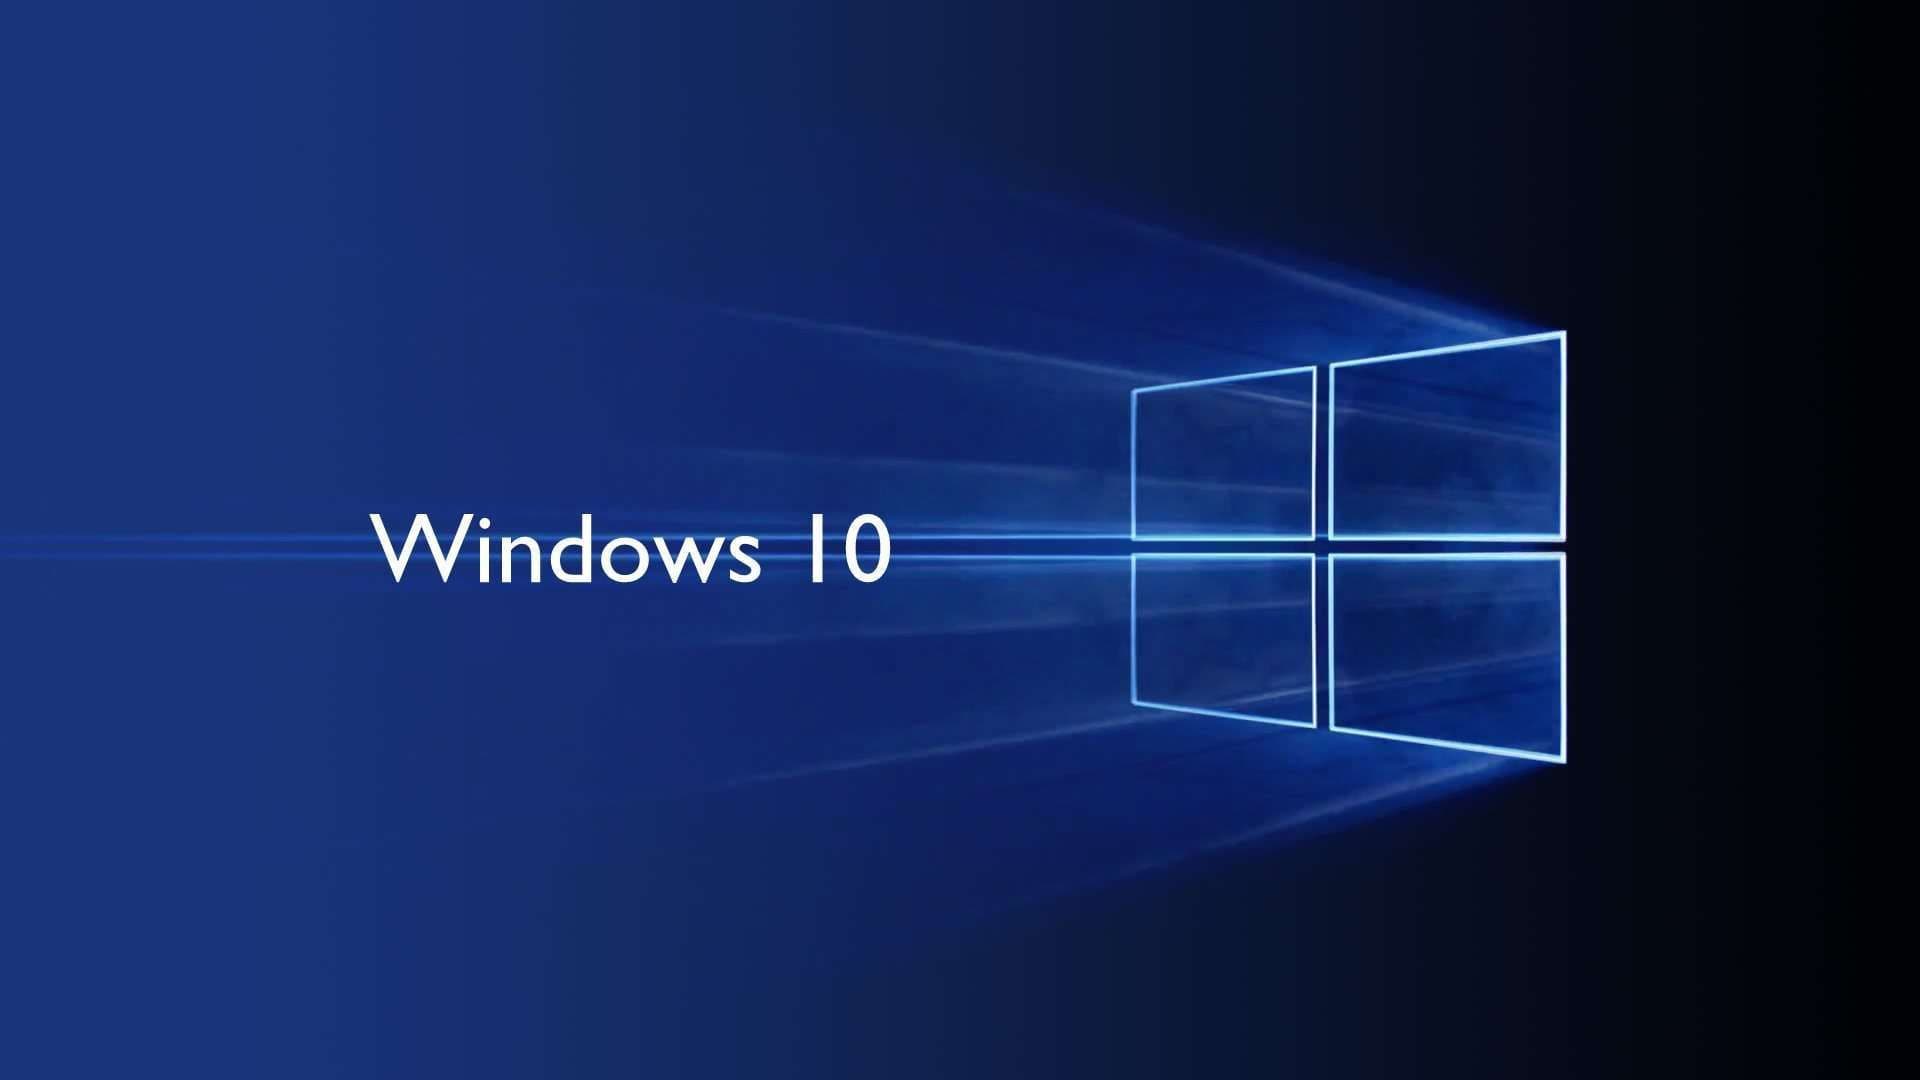 Windows 10: The Ultimate Operating System